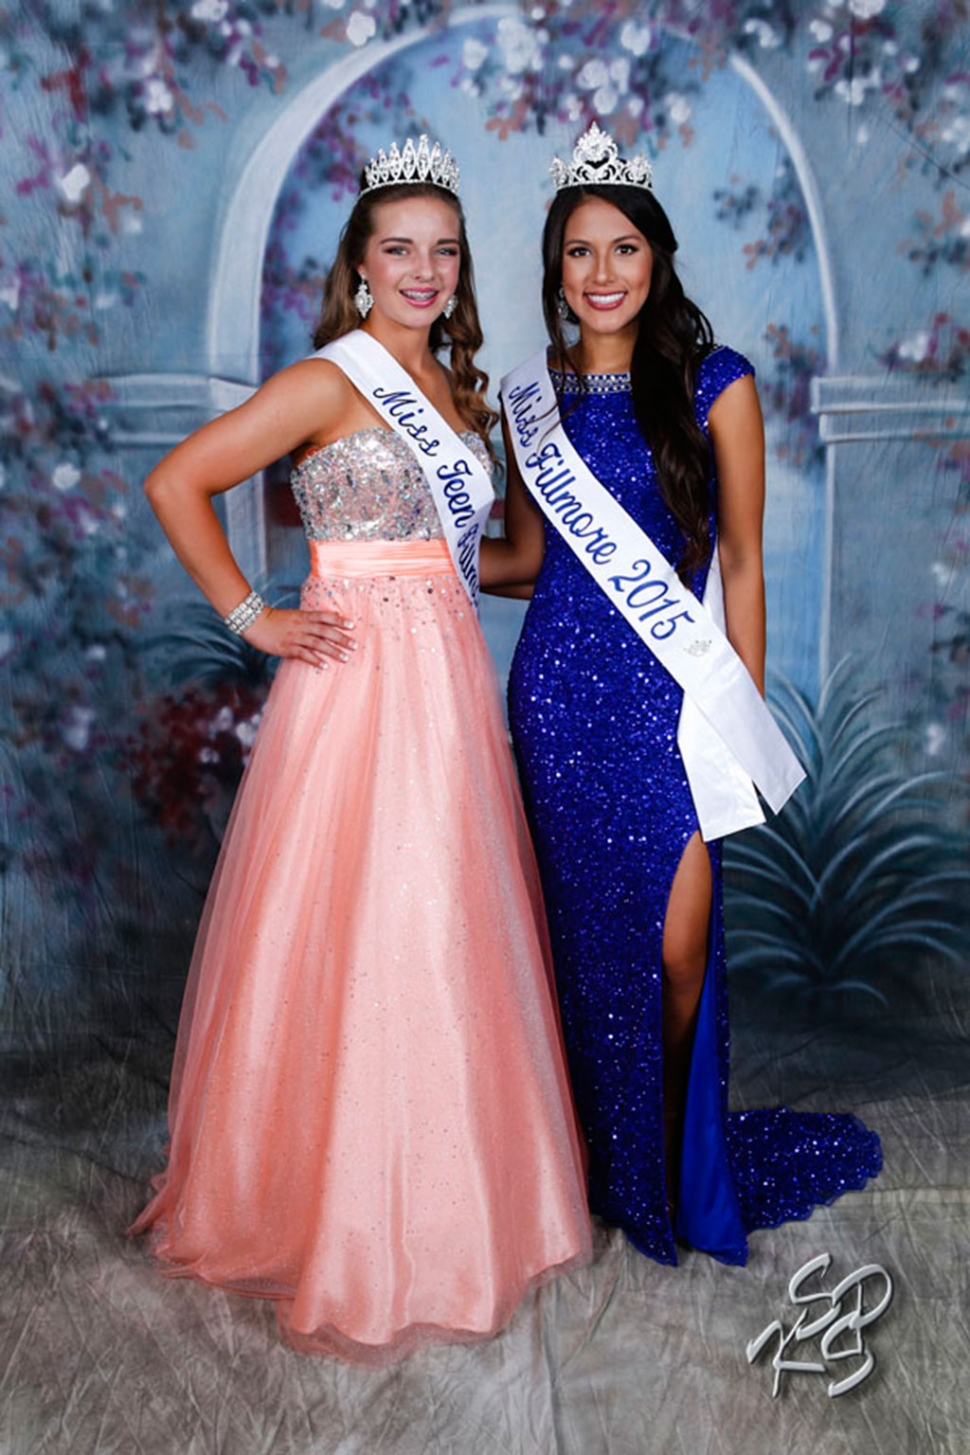 Congratulations to all of the winners of the 2015 Miss Fillmore, Miss Teen Fillmore pageant. (l-r) Miss Teen Fillmore Chloe Stines and Miss Fillmore Stephanie Meza. The event was held on Friday, April 20th. Photos courtesy of KSSP Photography Studio.